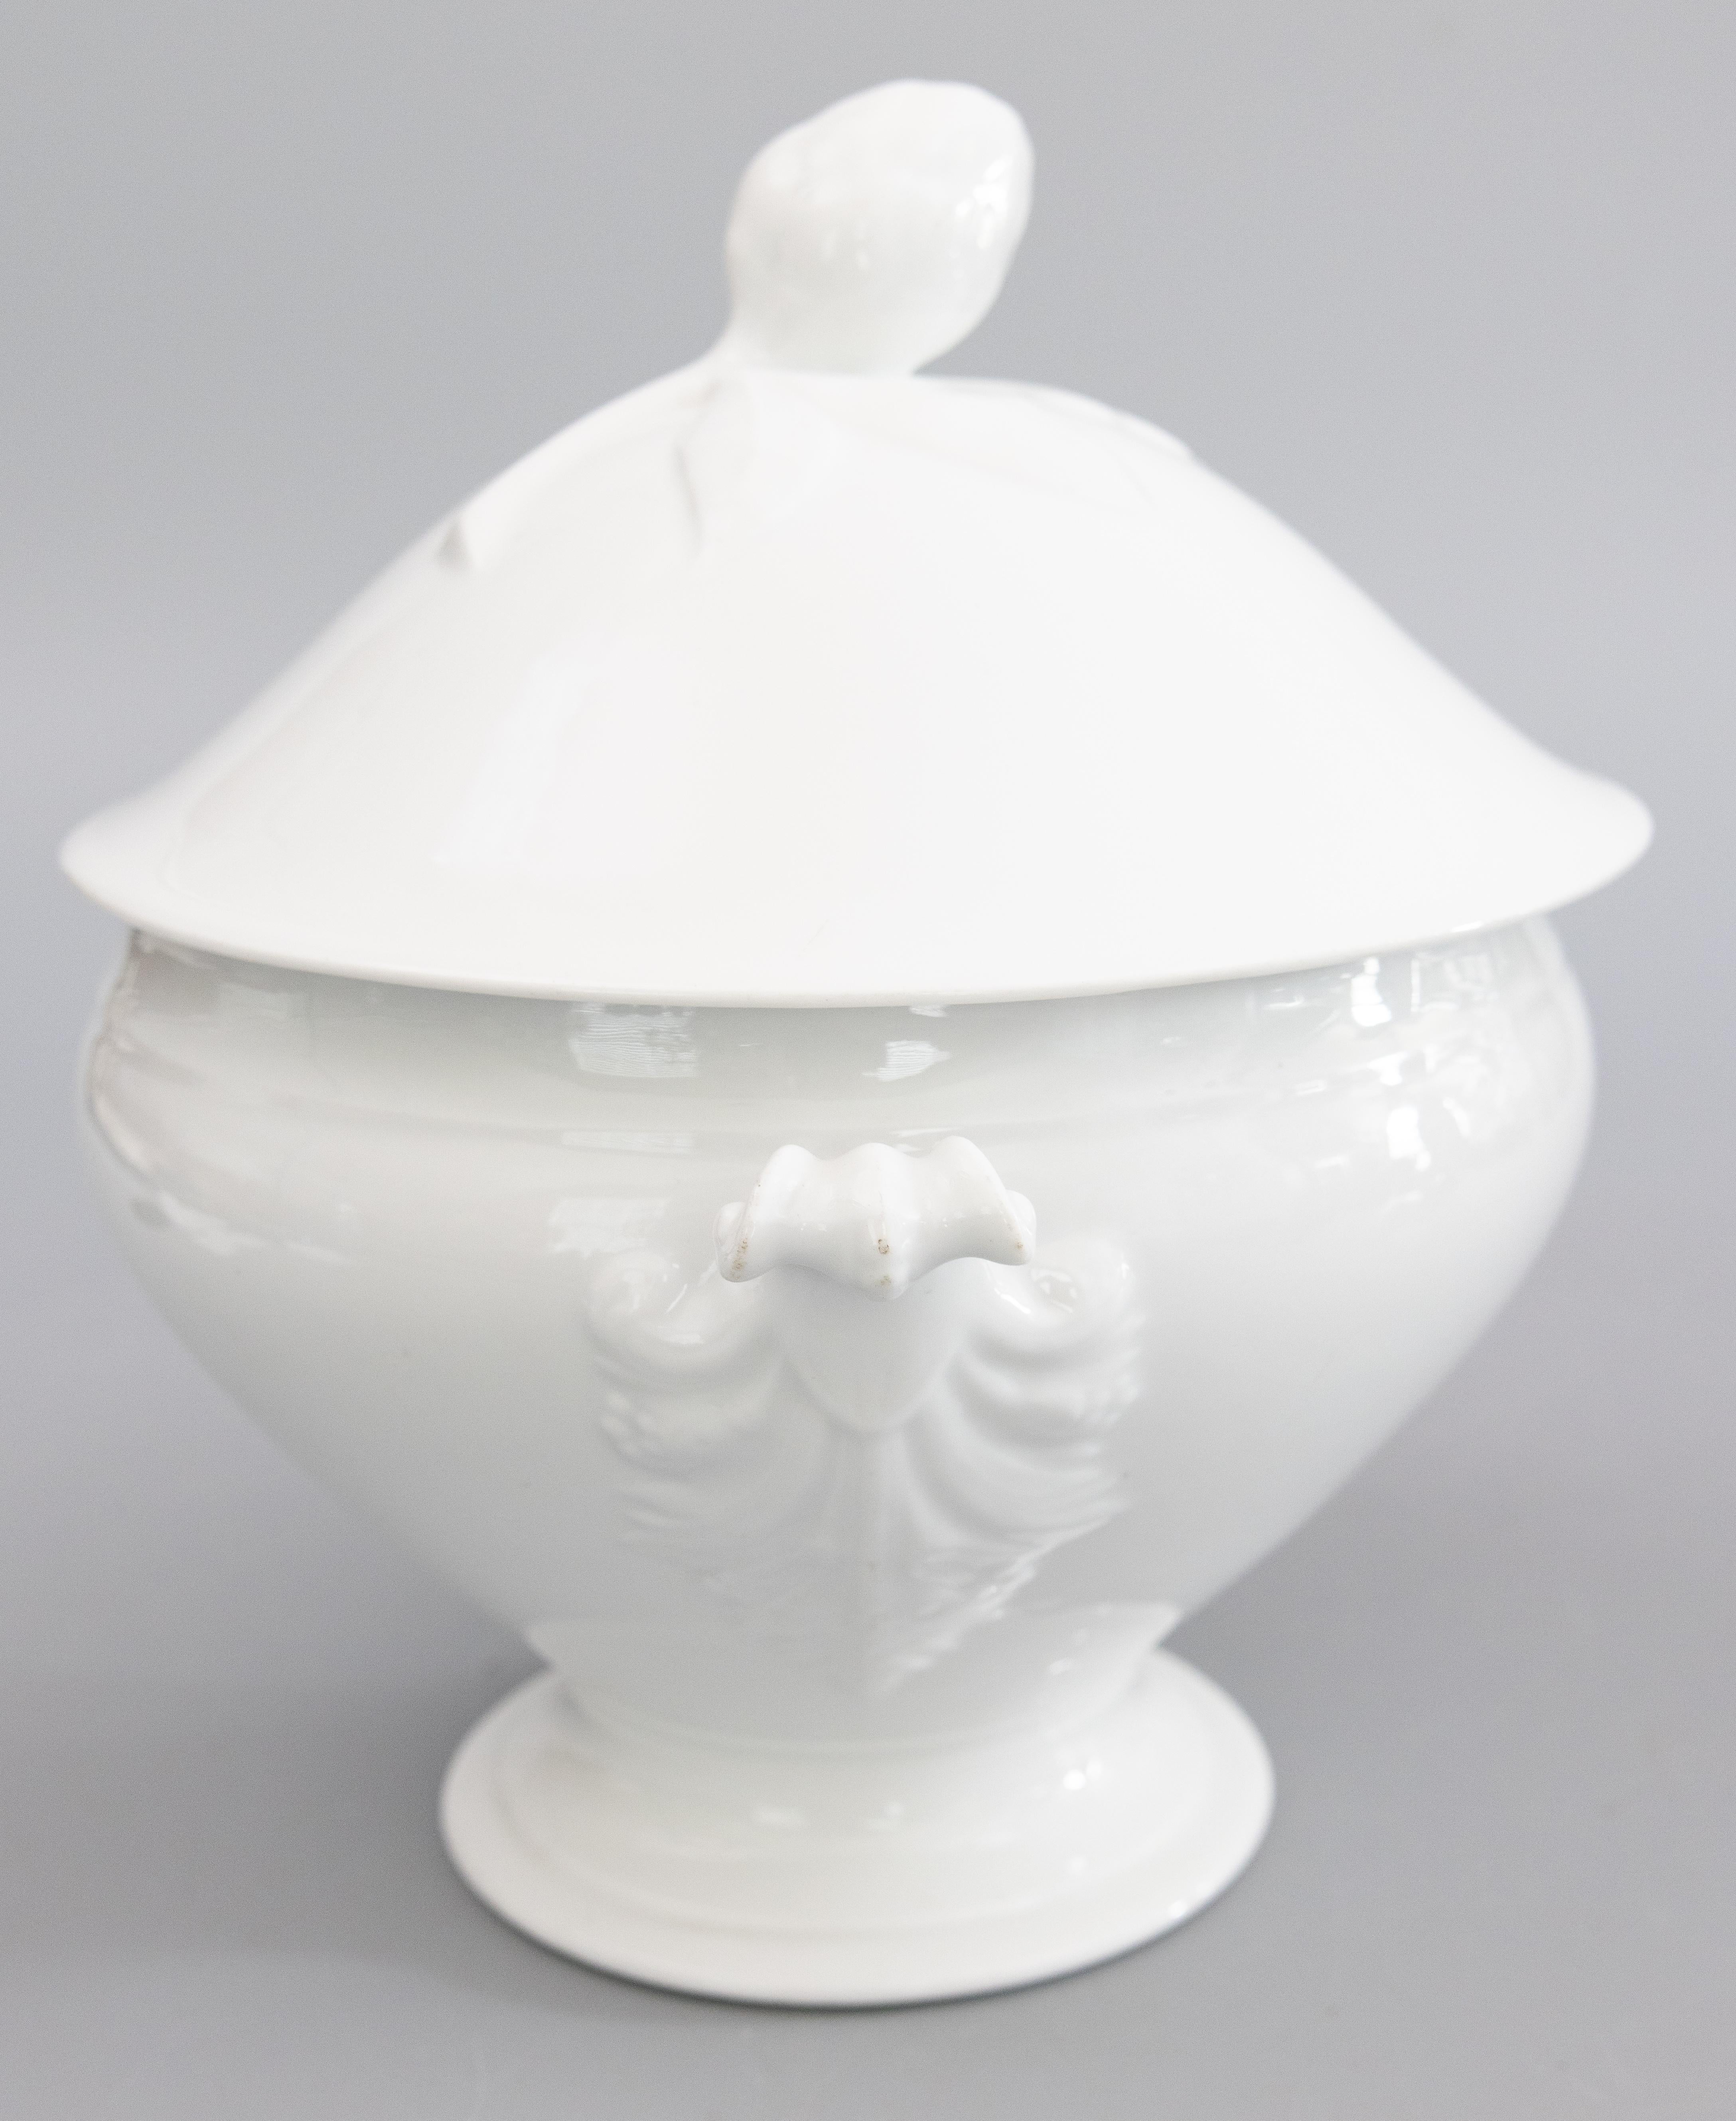 A gorgeous antique French white ironstone lidded soup tureen, circa 1900. No maker's mark. This fine soup tureen has a decorative finial and lovely ornate handles. It's perfect for display or serving at your next party. 

DIMENSIONS
10.75ʺW × 9ʺD ×